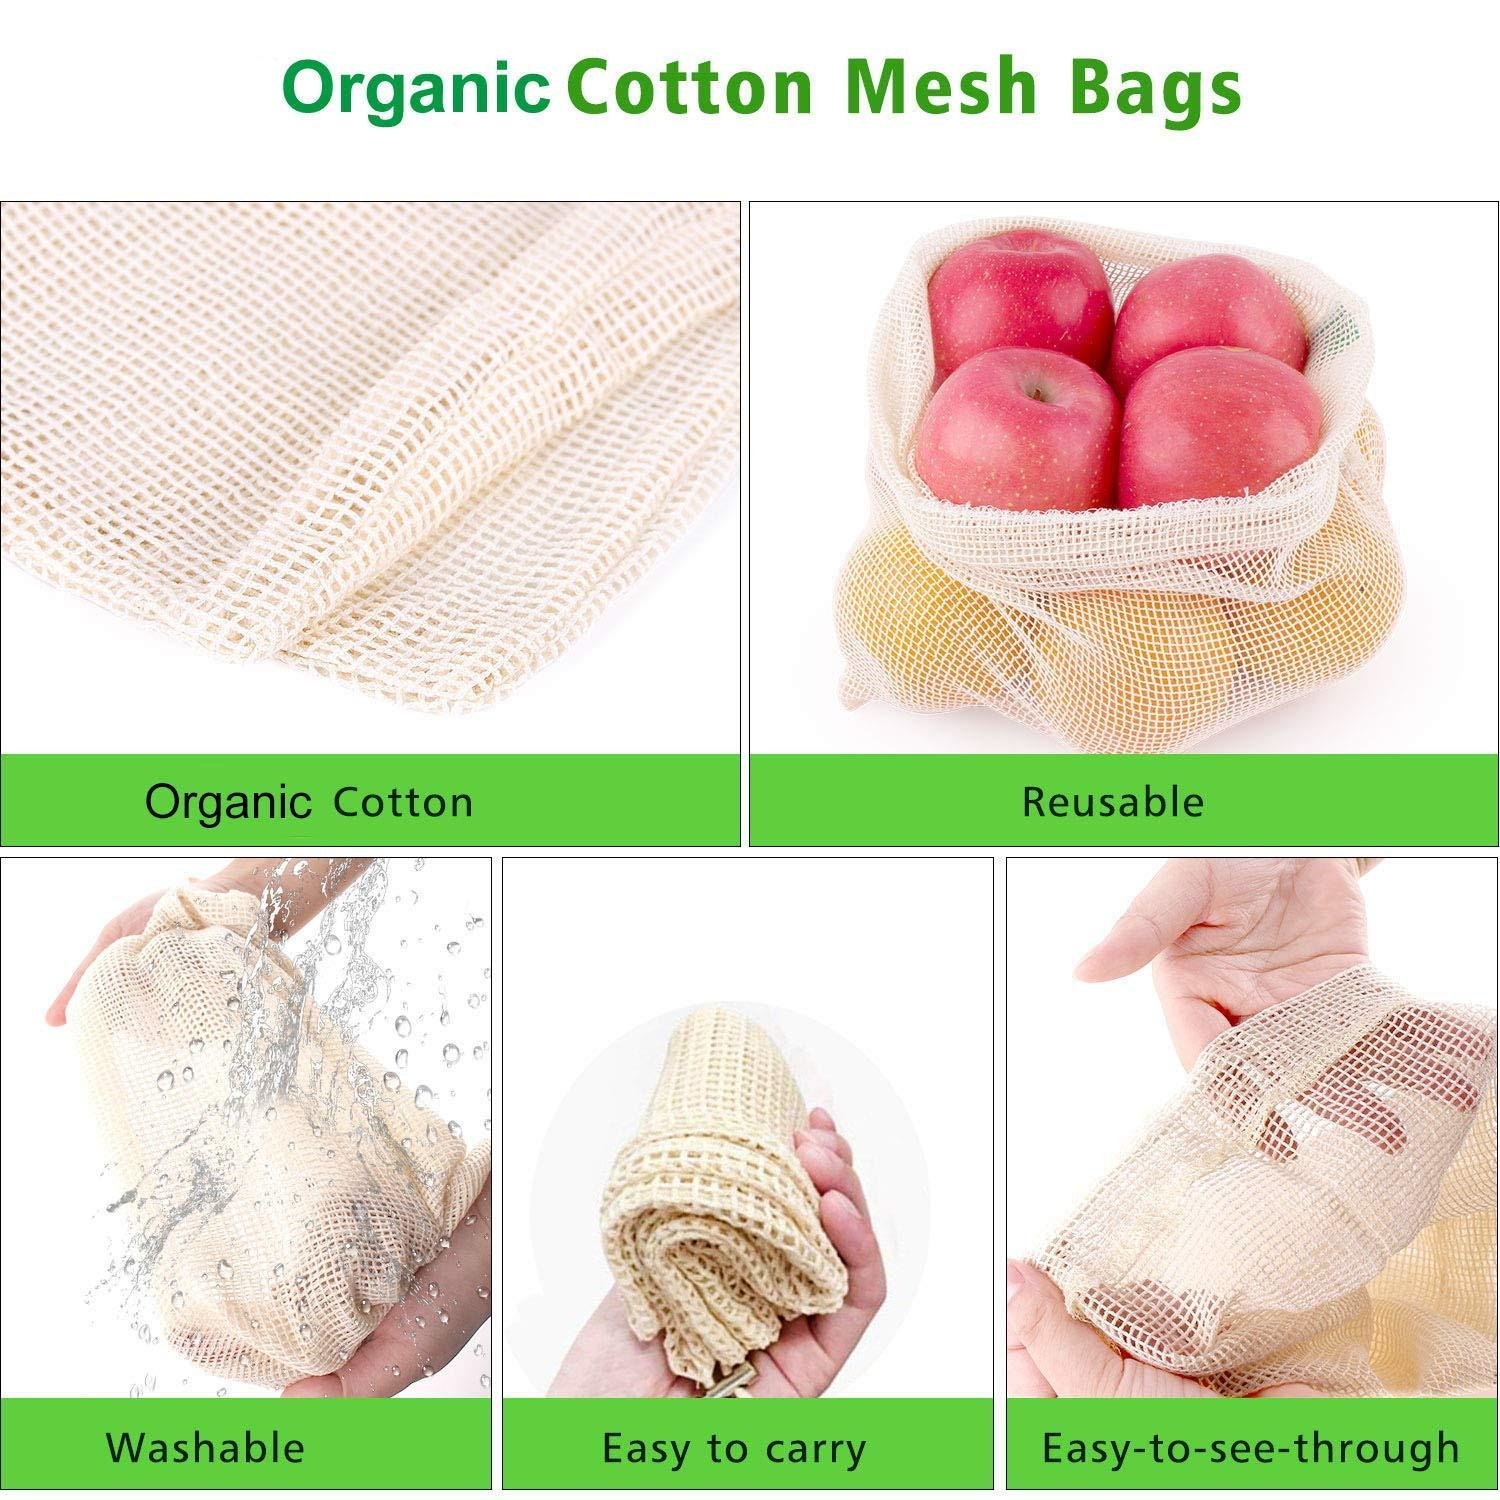 Washable Reusable Double-Stitched Seams Mesh Sacks for Grocery Shopping and Stor 4